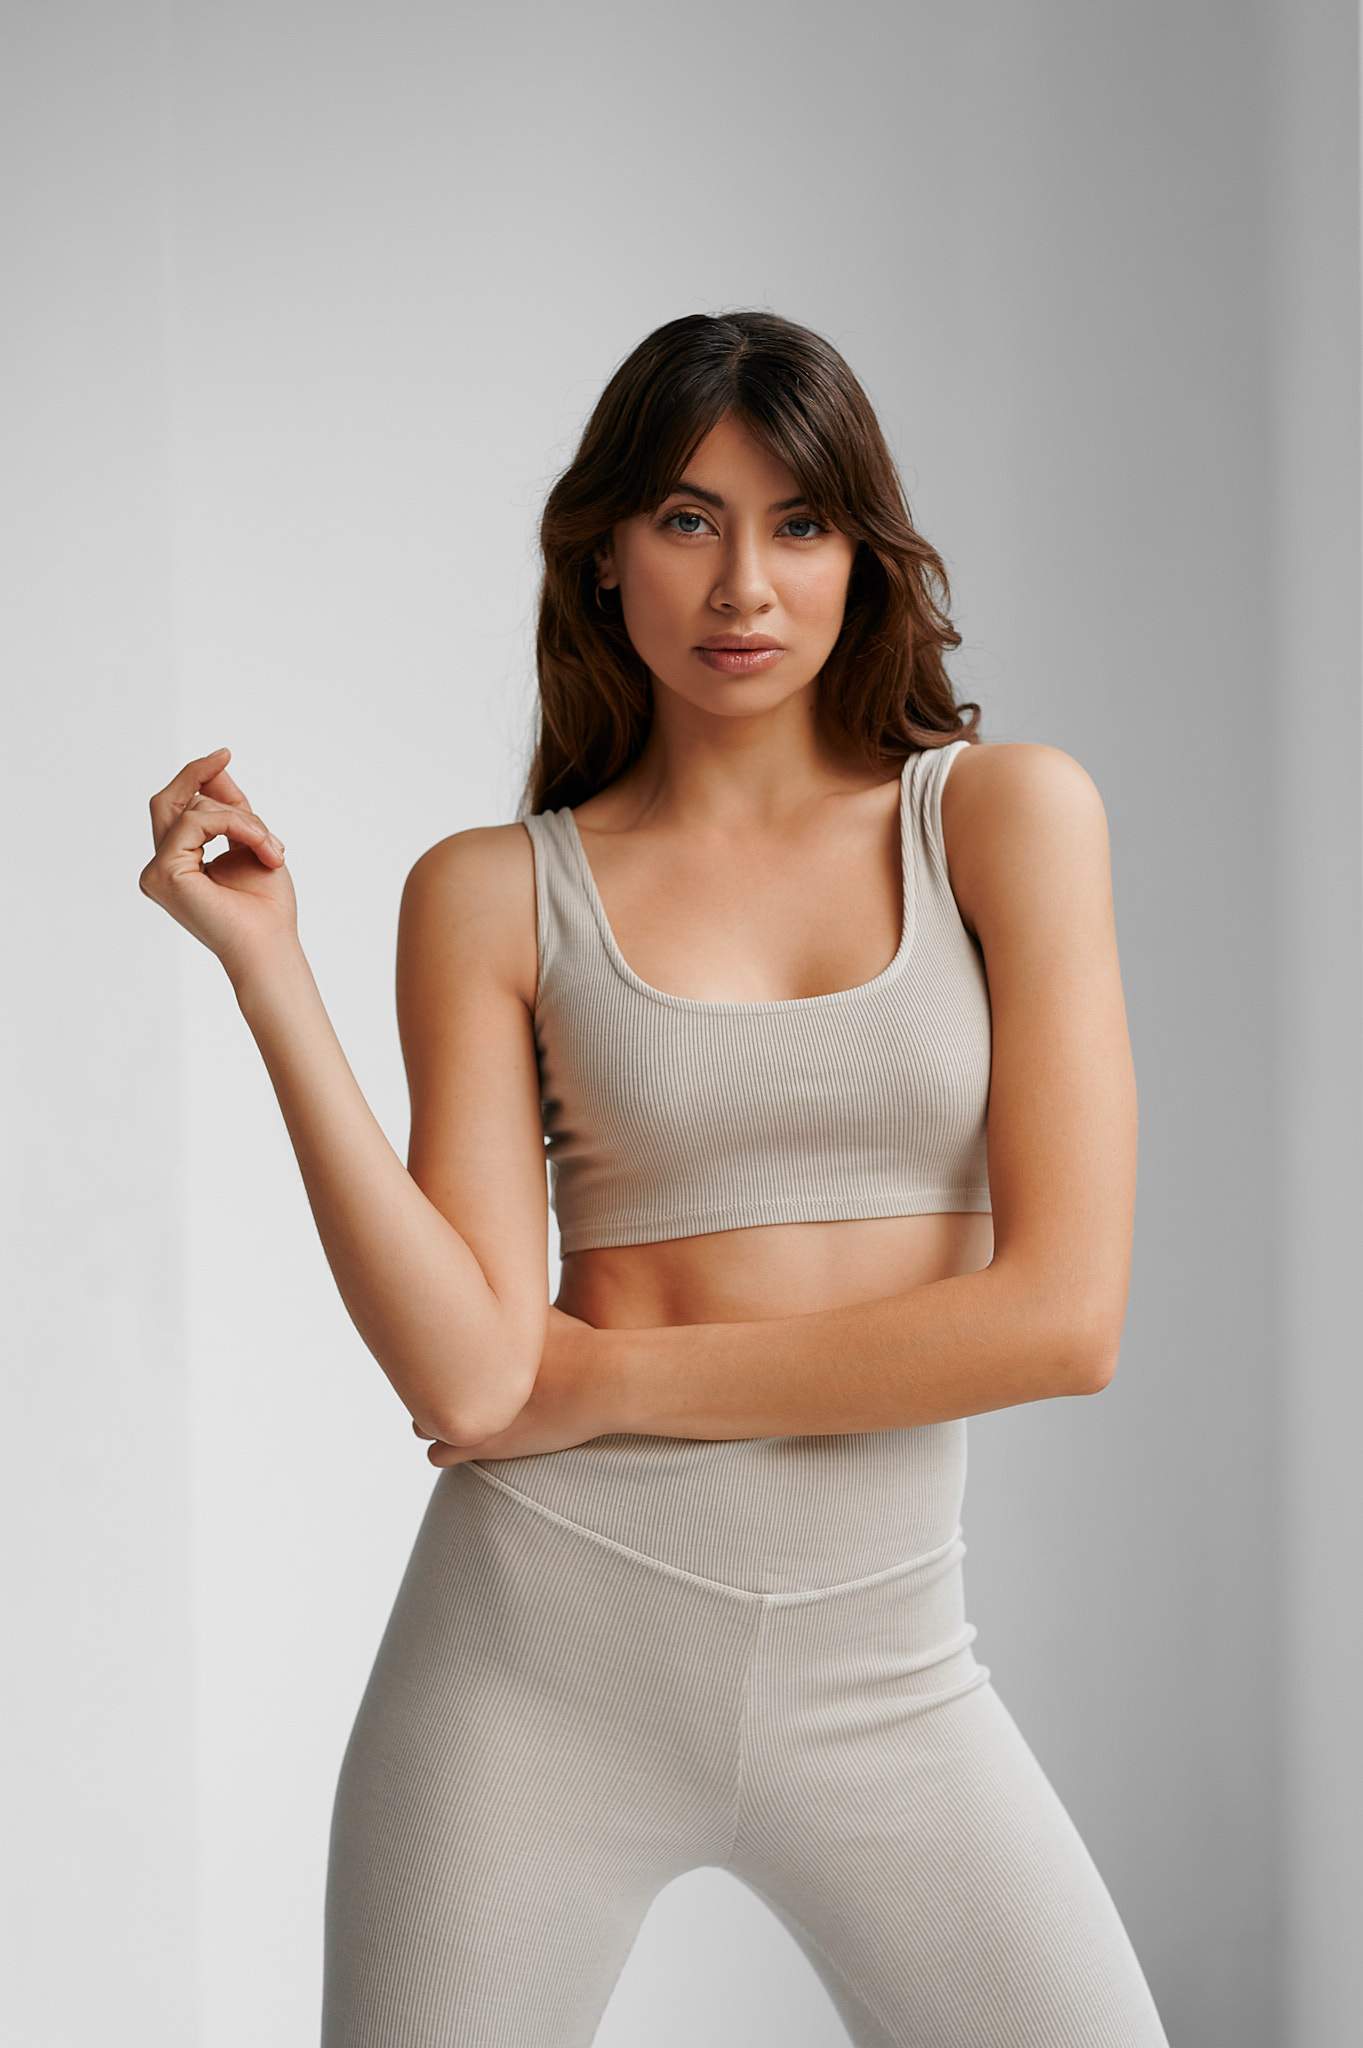 Kefi Top - Light Beige - Front Image - Ribbed Fabric - Second-skin fit - Easy-to-Wear & Versatile - Easy-to-Match - High Quality Basic - Streetstyle - Streetwear - Flattering High-raise band - Strategically placed seamed panels - tight fit, adapts to body - worn out feel - Elegant - Casual - Sophisticated - Becca & Cole